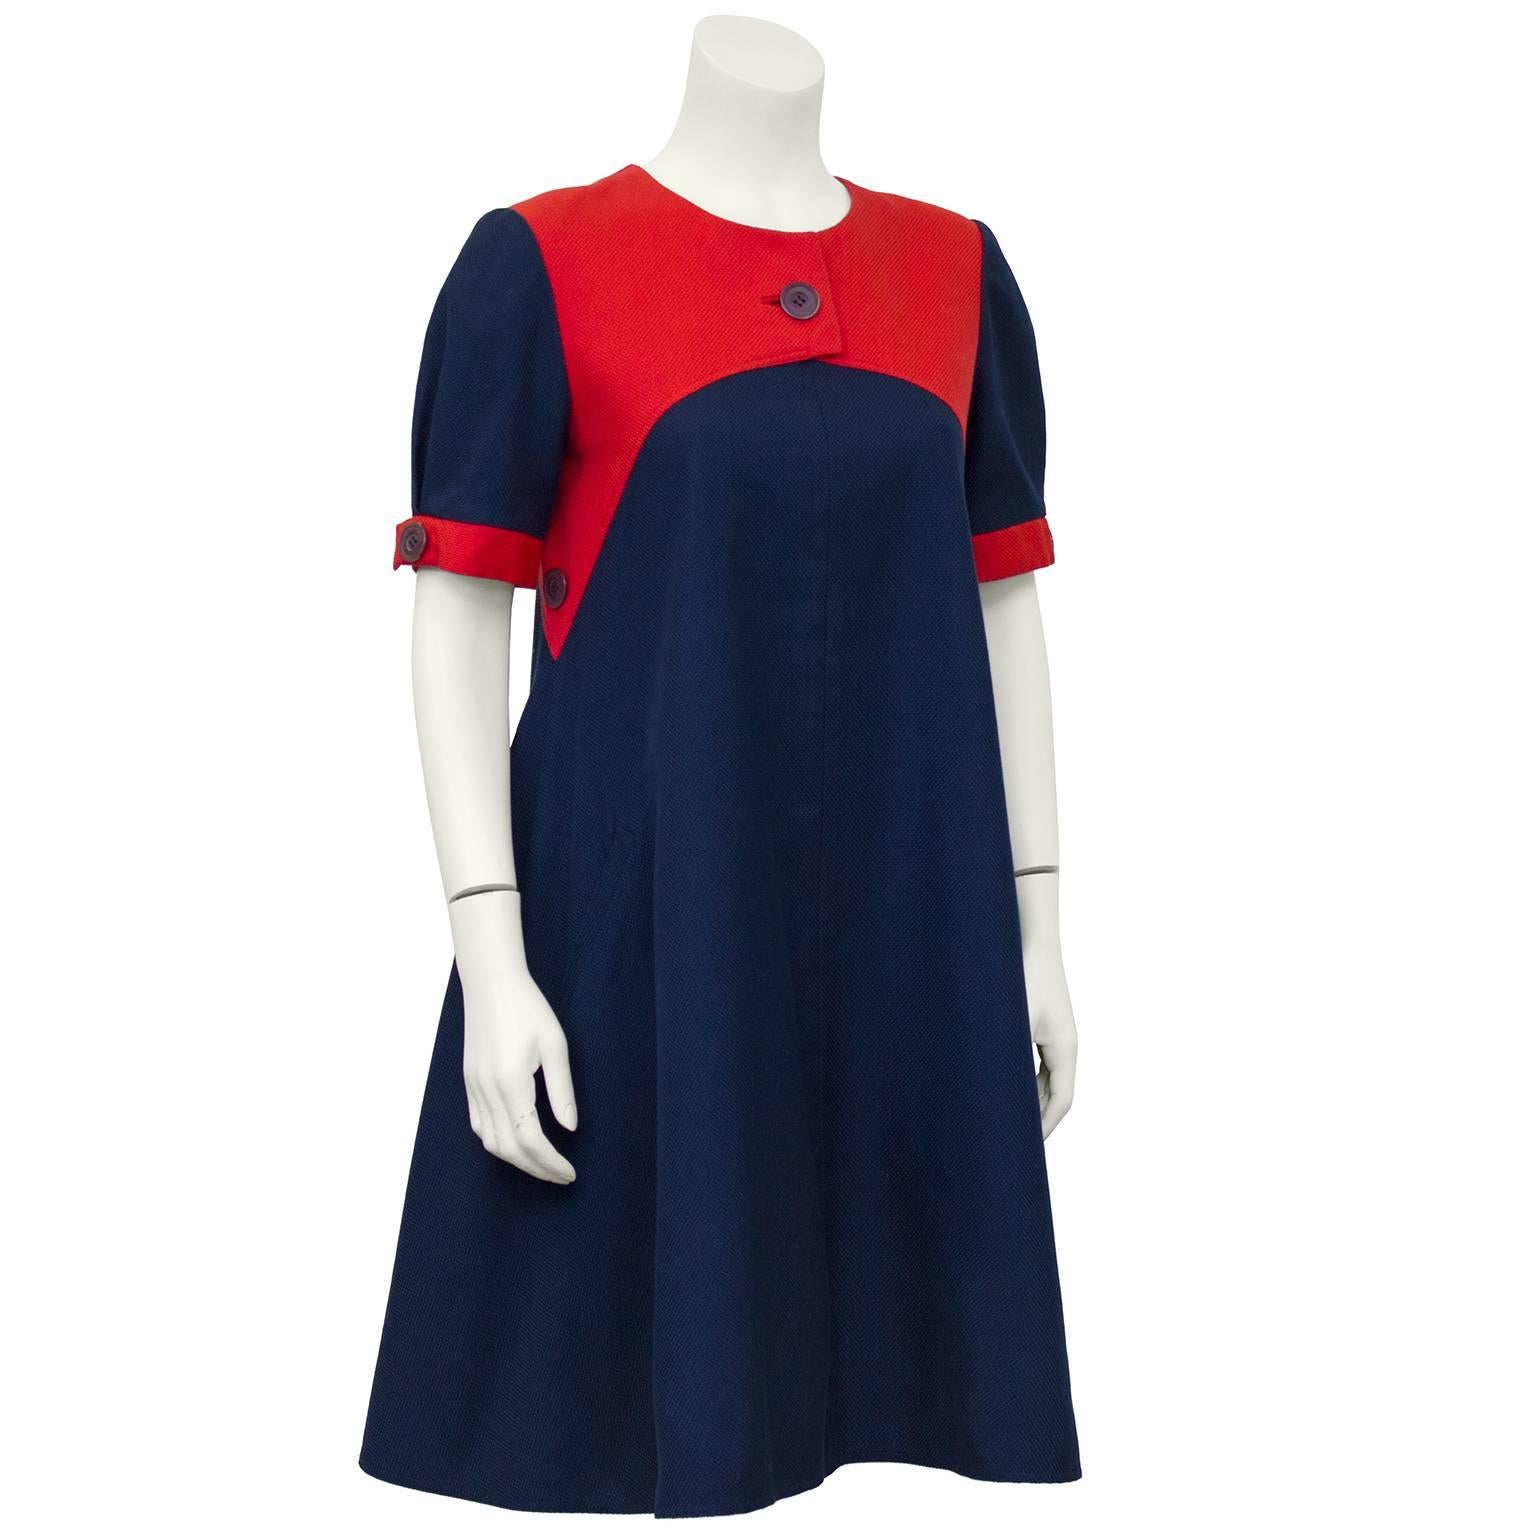 1980's Geoffrey Beene navy blue weaved cotton swing dress with contrasting fire engine red yoke and sleeve trim. Eggplant plastic button details at center of yoke, sleeves and side seams. Lined in navy silk with a 4